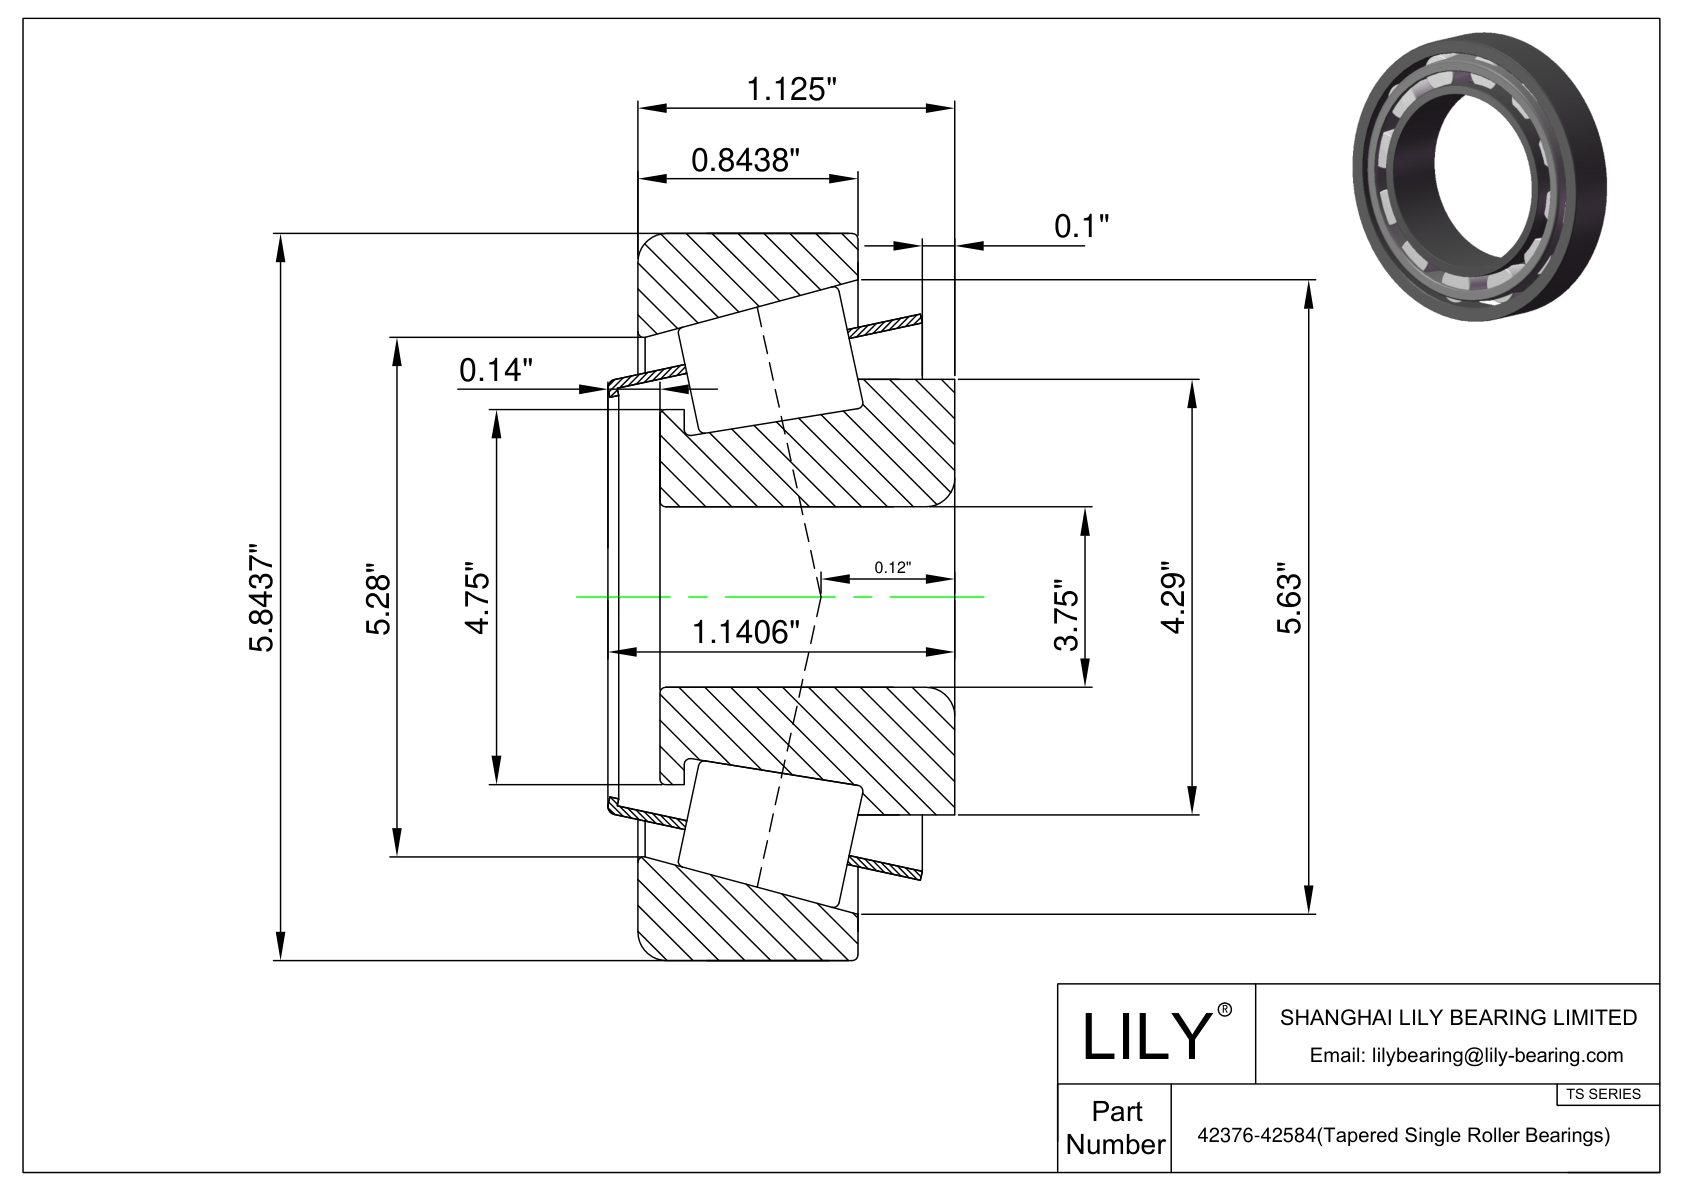 42376-42584 TS (Tapered Single Roller Bearings) (Imperial) cad drawing